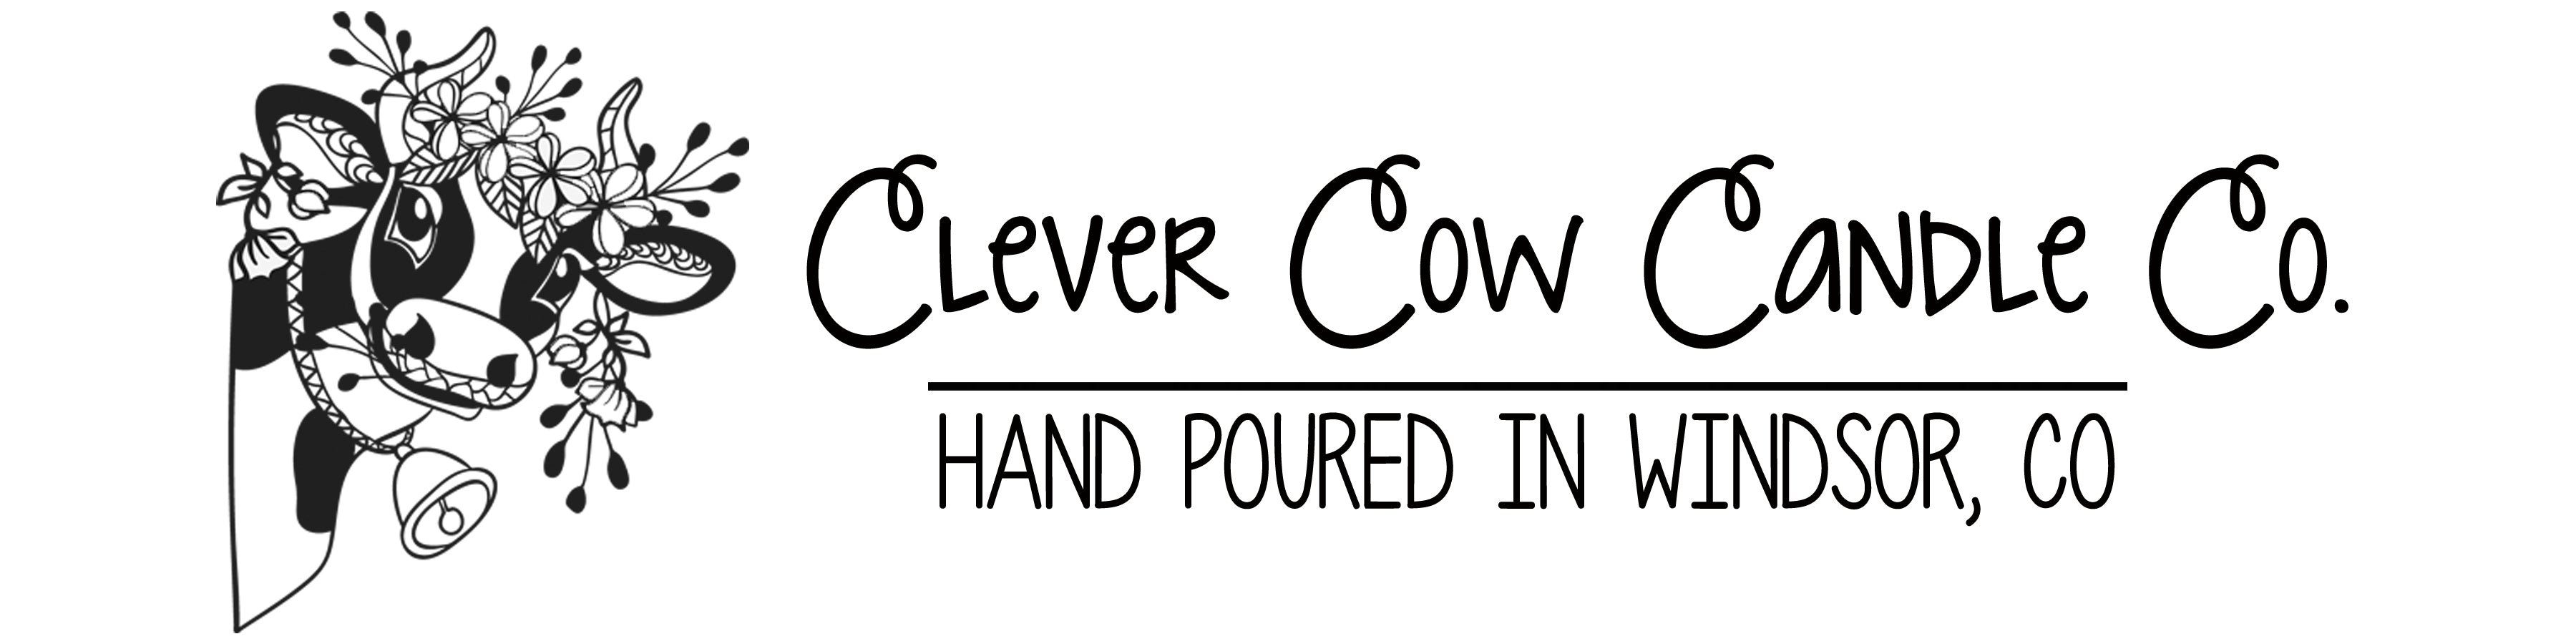 Clever Cow Candle Co